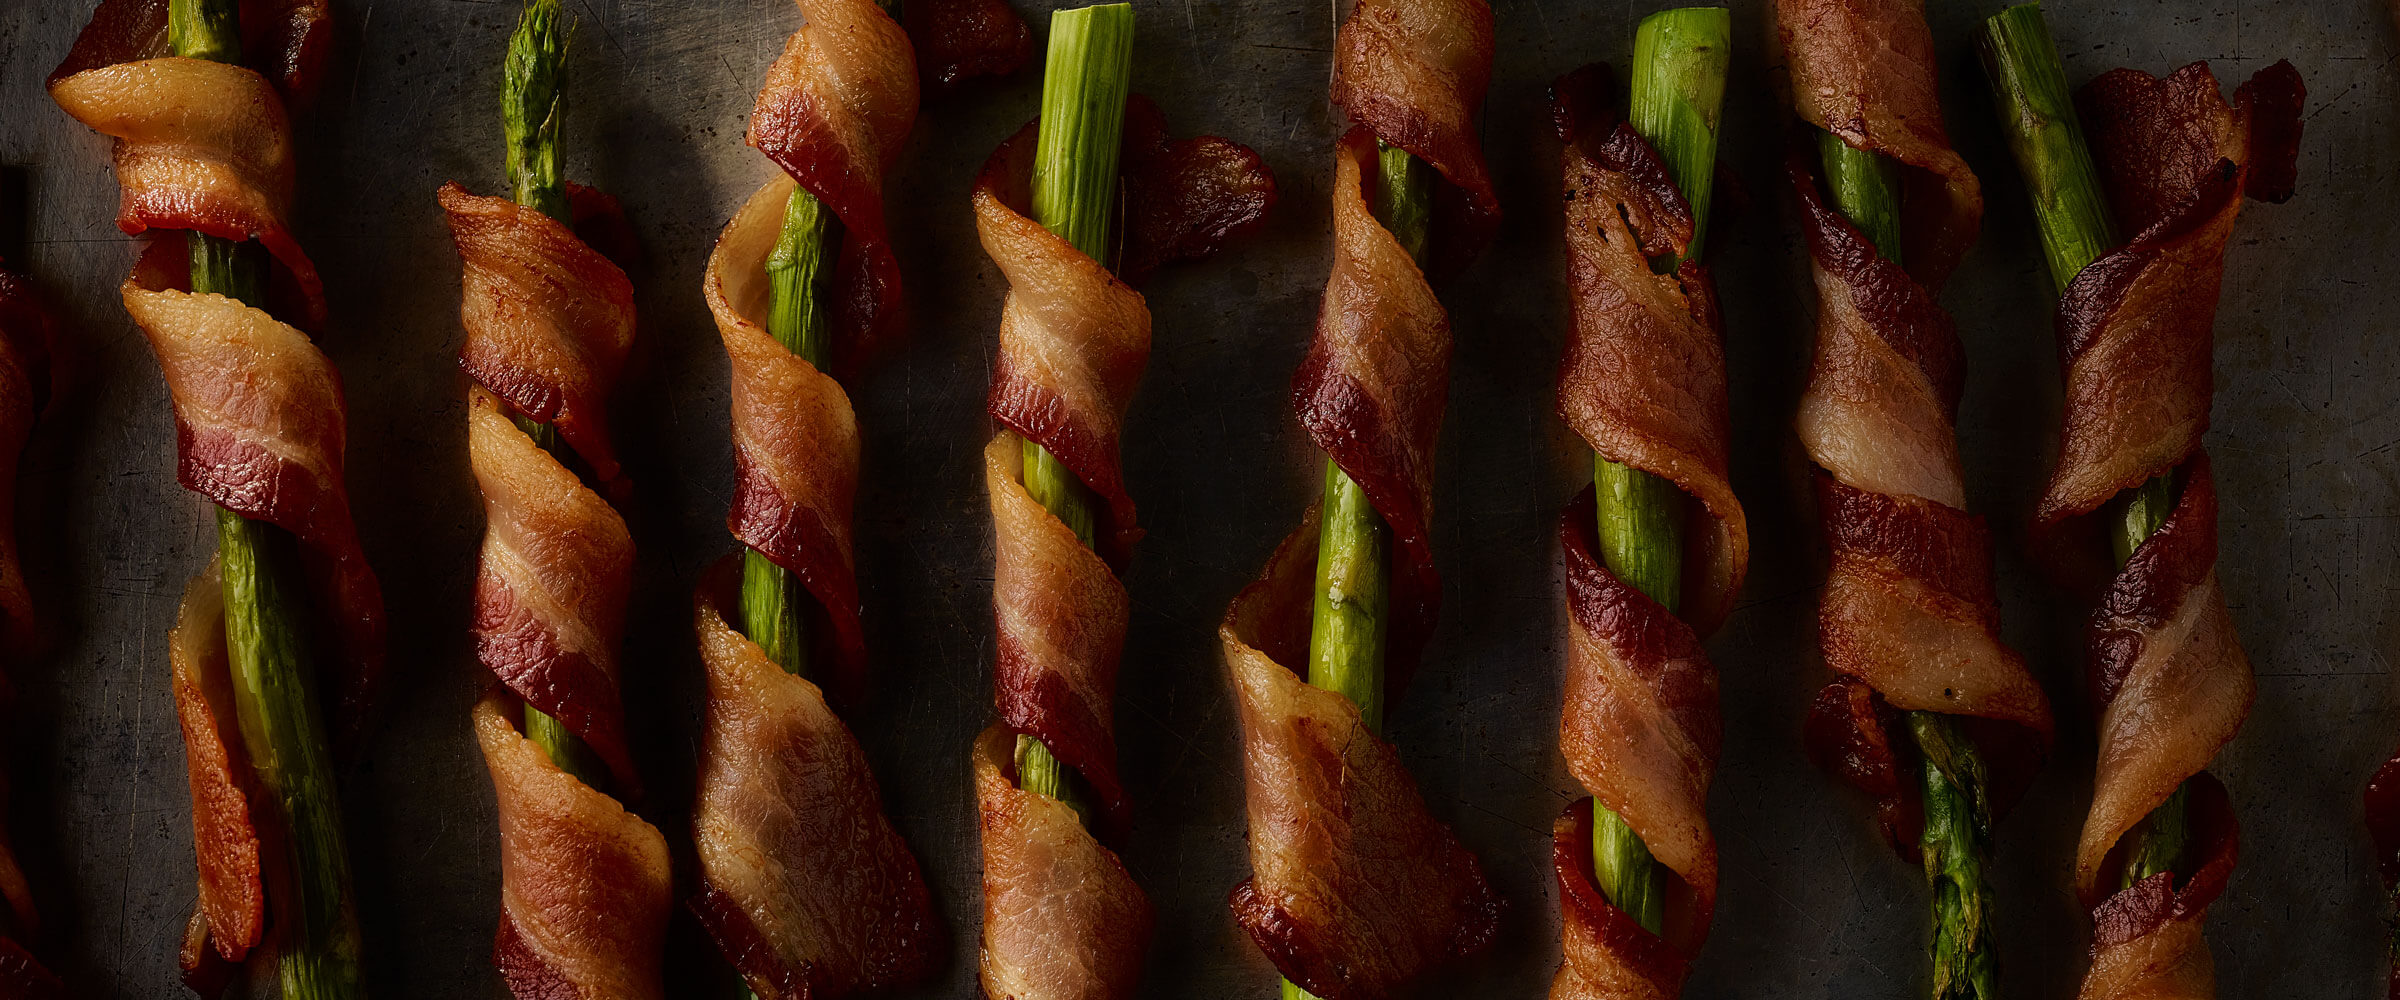 Bacon Wrapped Asparagus on sheet pan